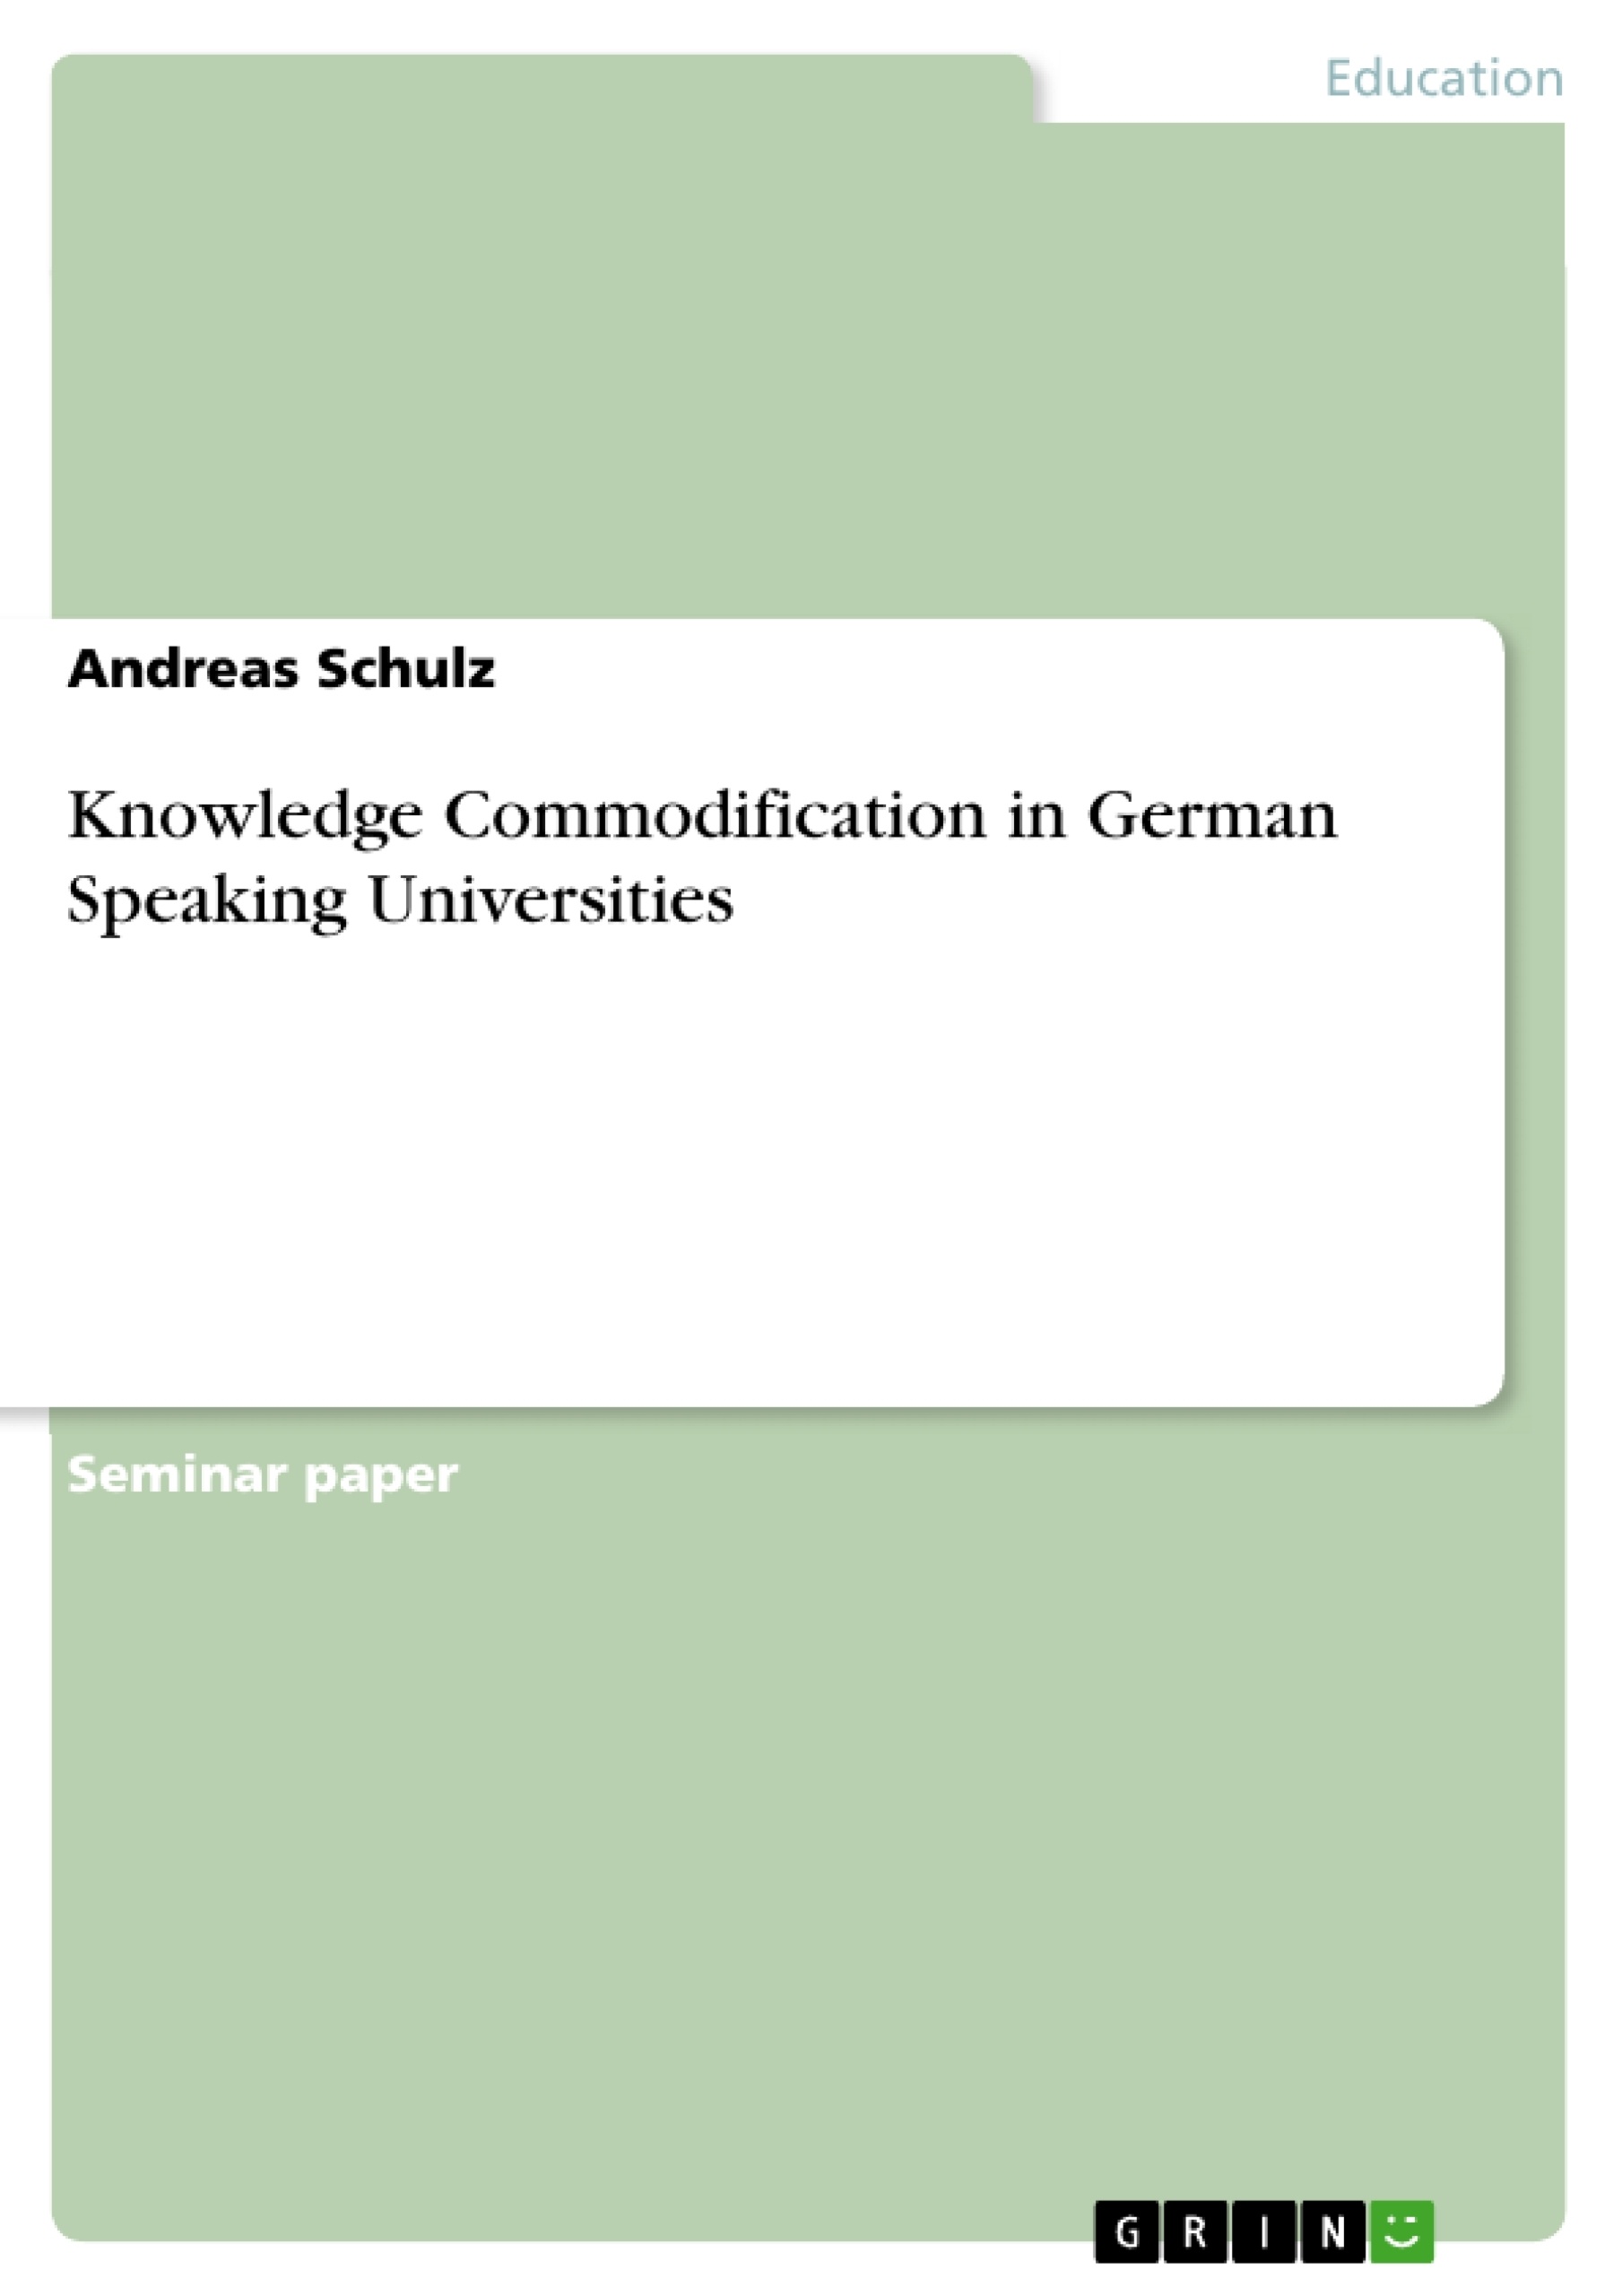 Title: Knowledge Commodification in German Speaking Universities